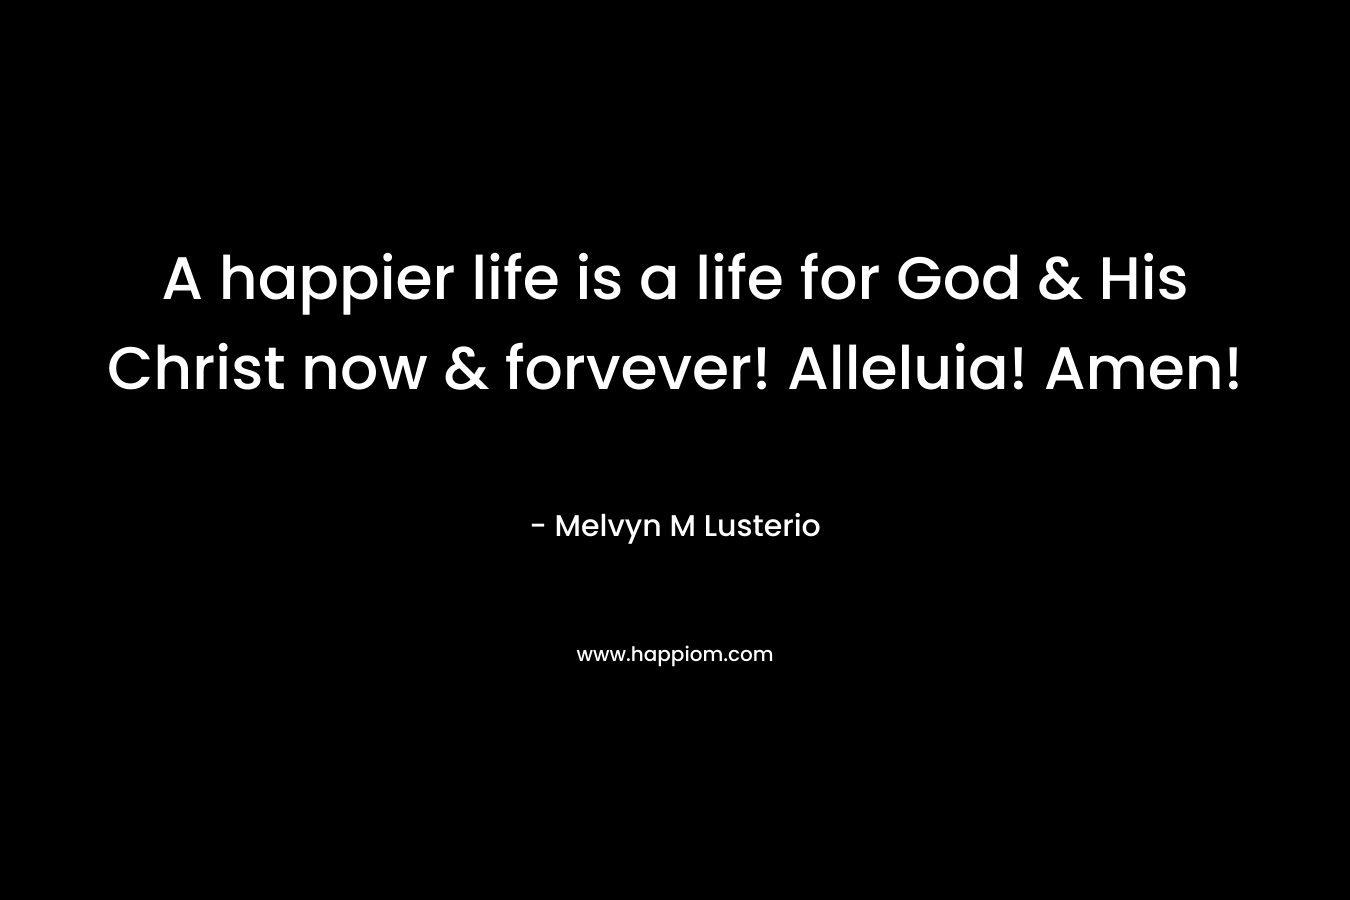 A happier life is a life for God & His Christ now & forvever! Alleluia! Amen!